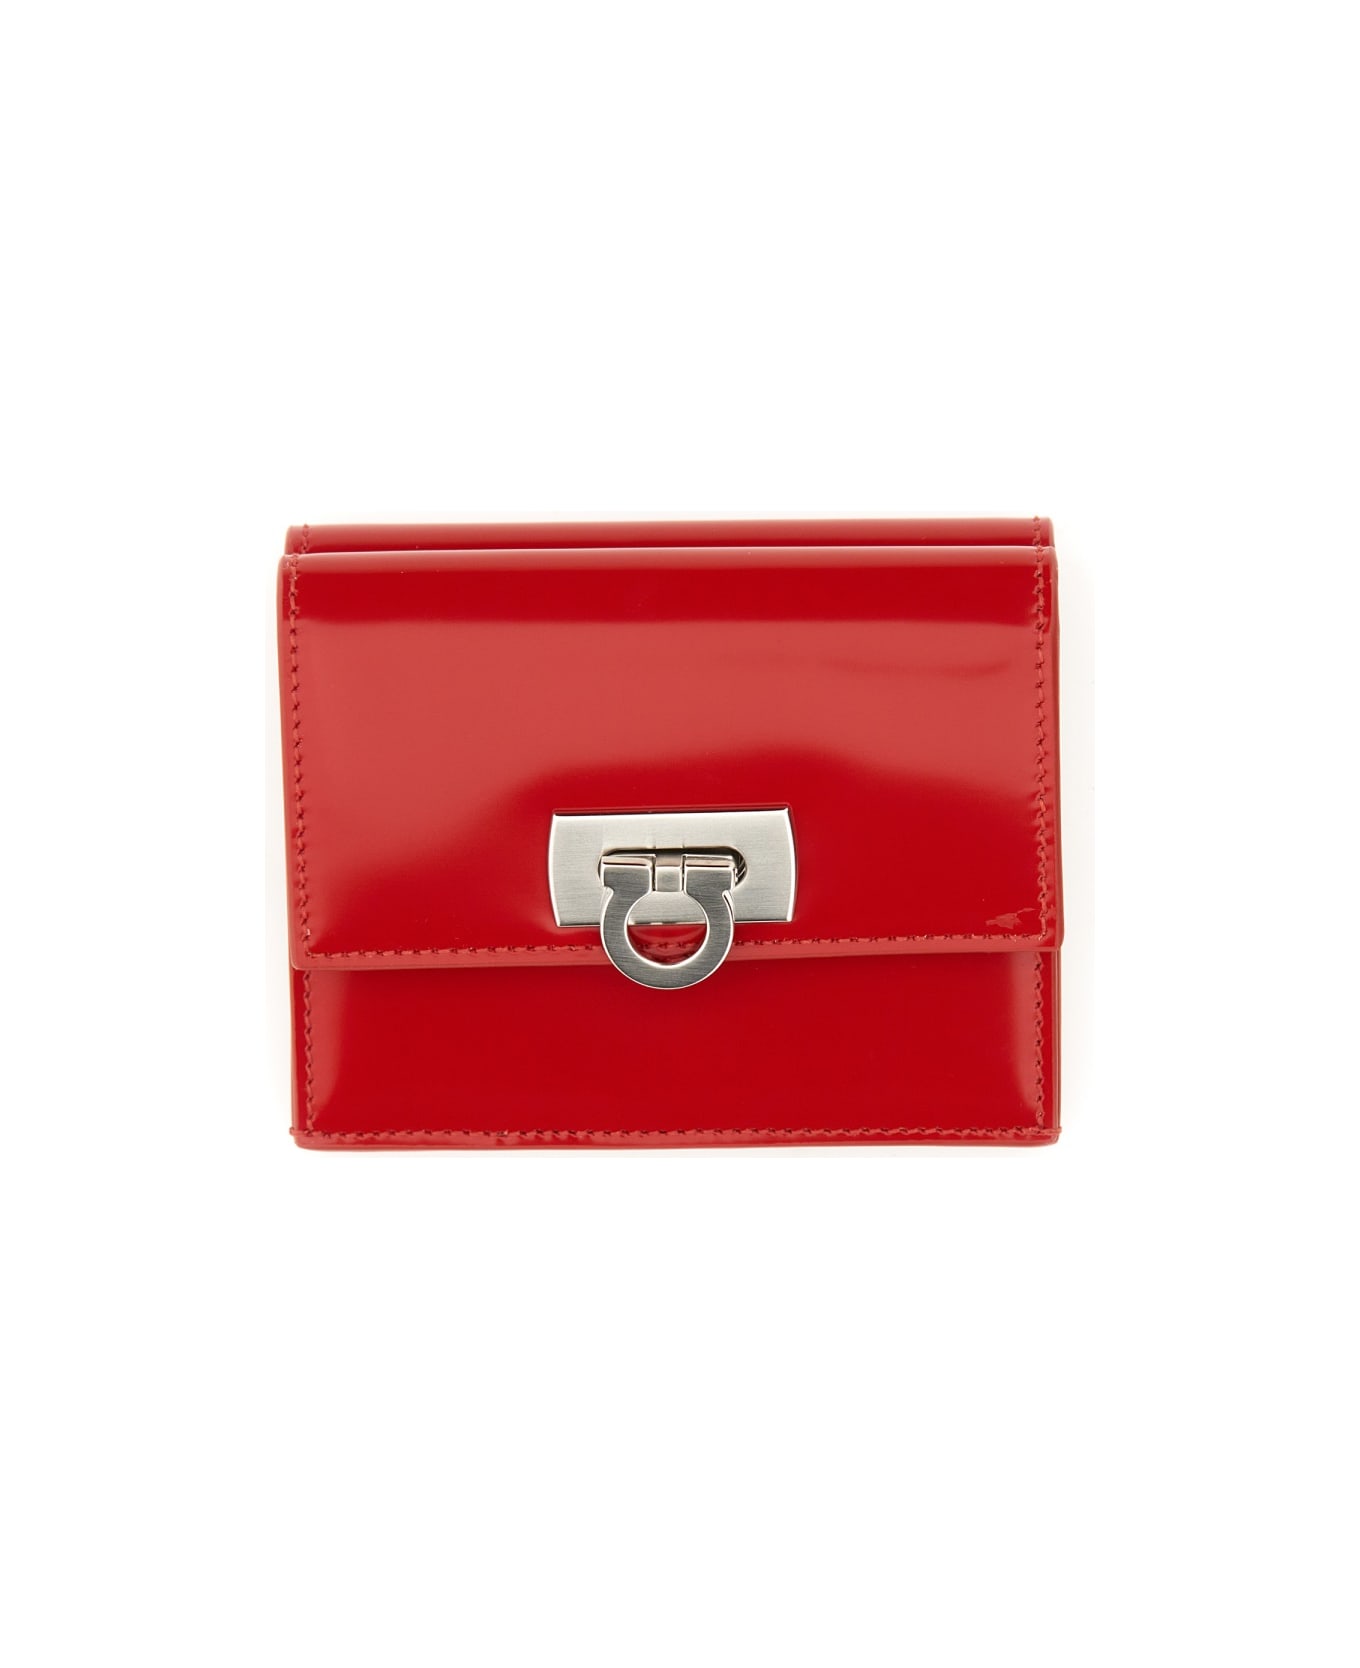 Ferragamo Compact Wallet With Hook-and-eye Closure - RED